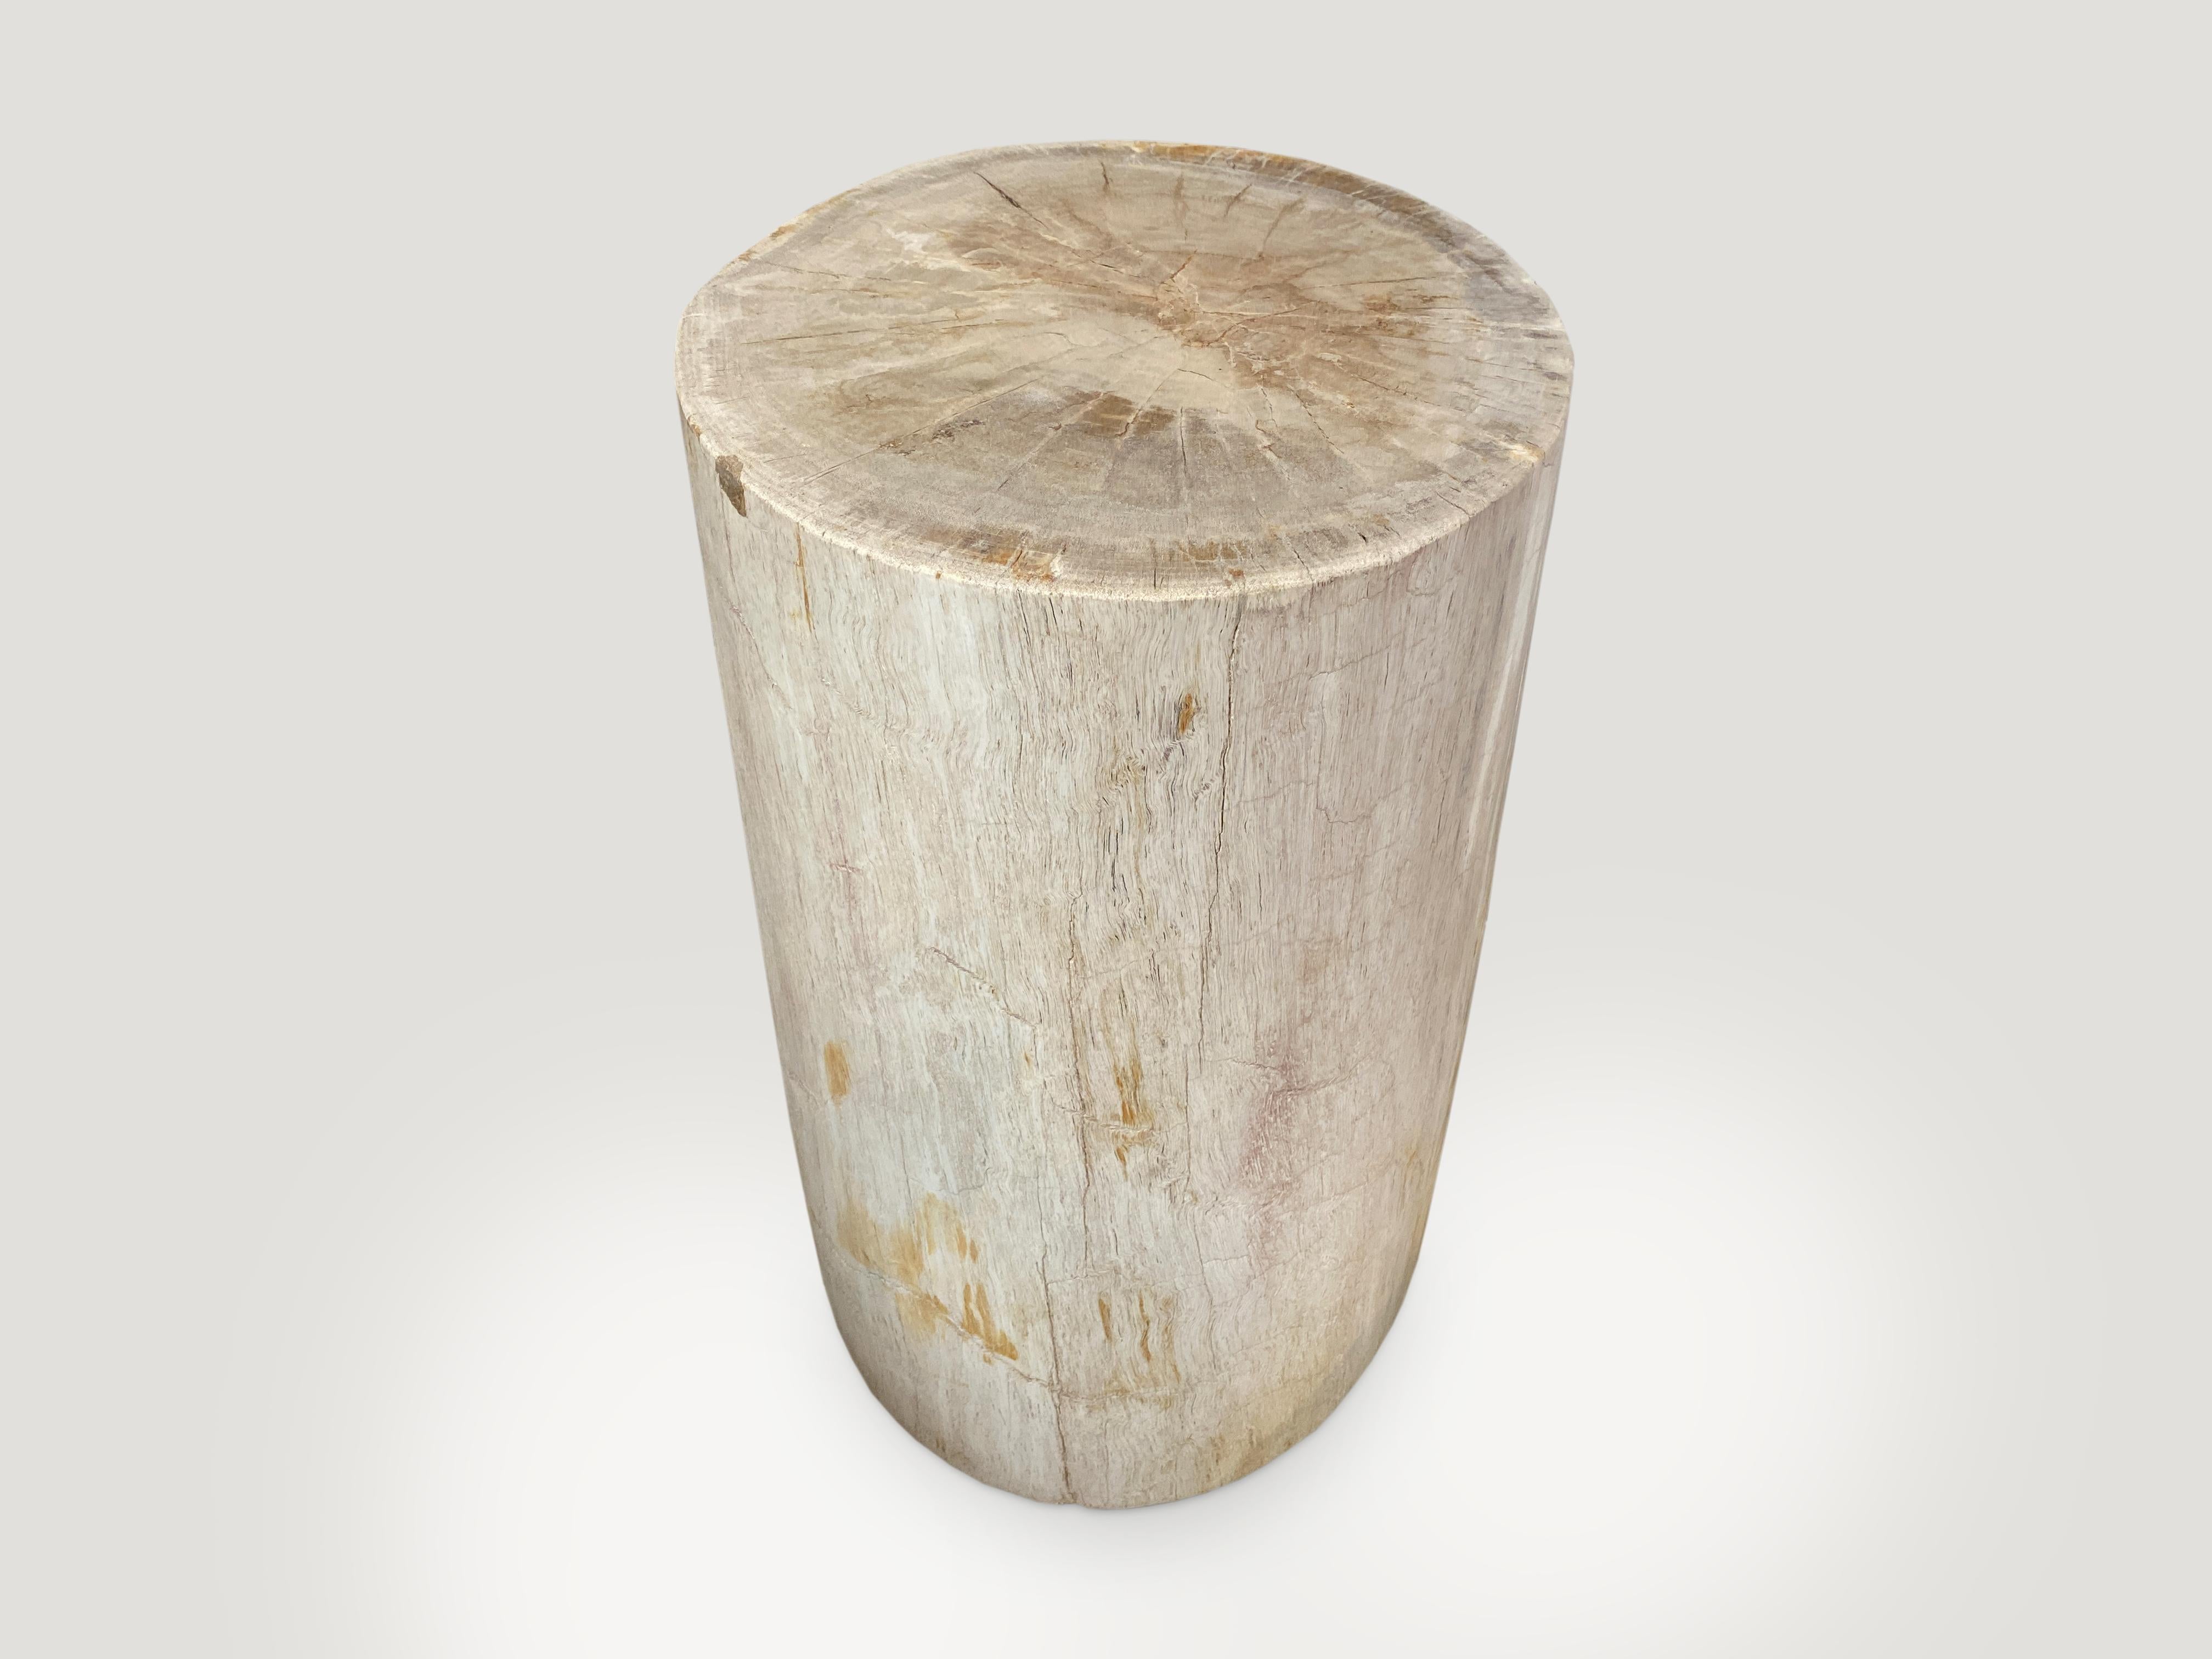 As with a diamond, we polish the highest quality fossilized petrified wood, using our latest ground breaking technology, to reveal its natural beauty and contrasting tones. It is then transformed into a unique piece of furniture, unlike any other